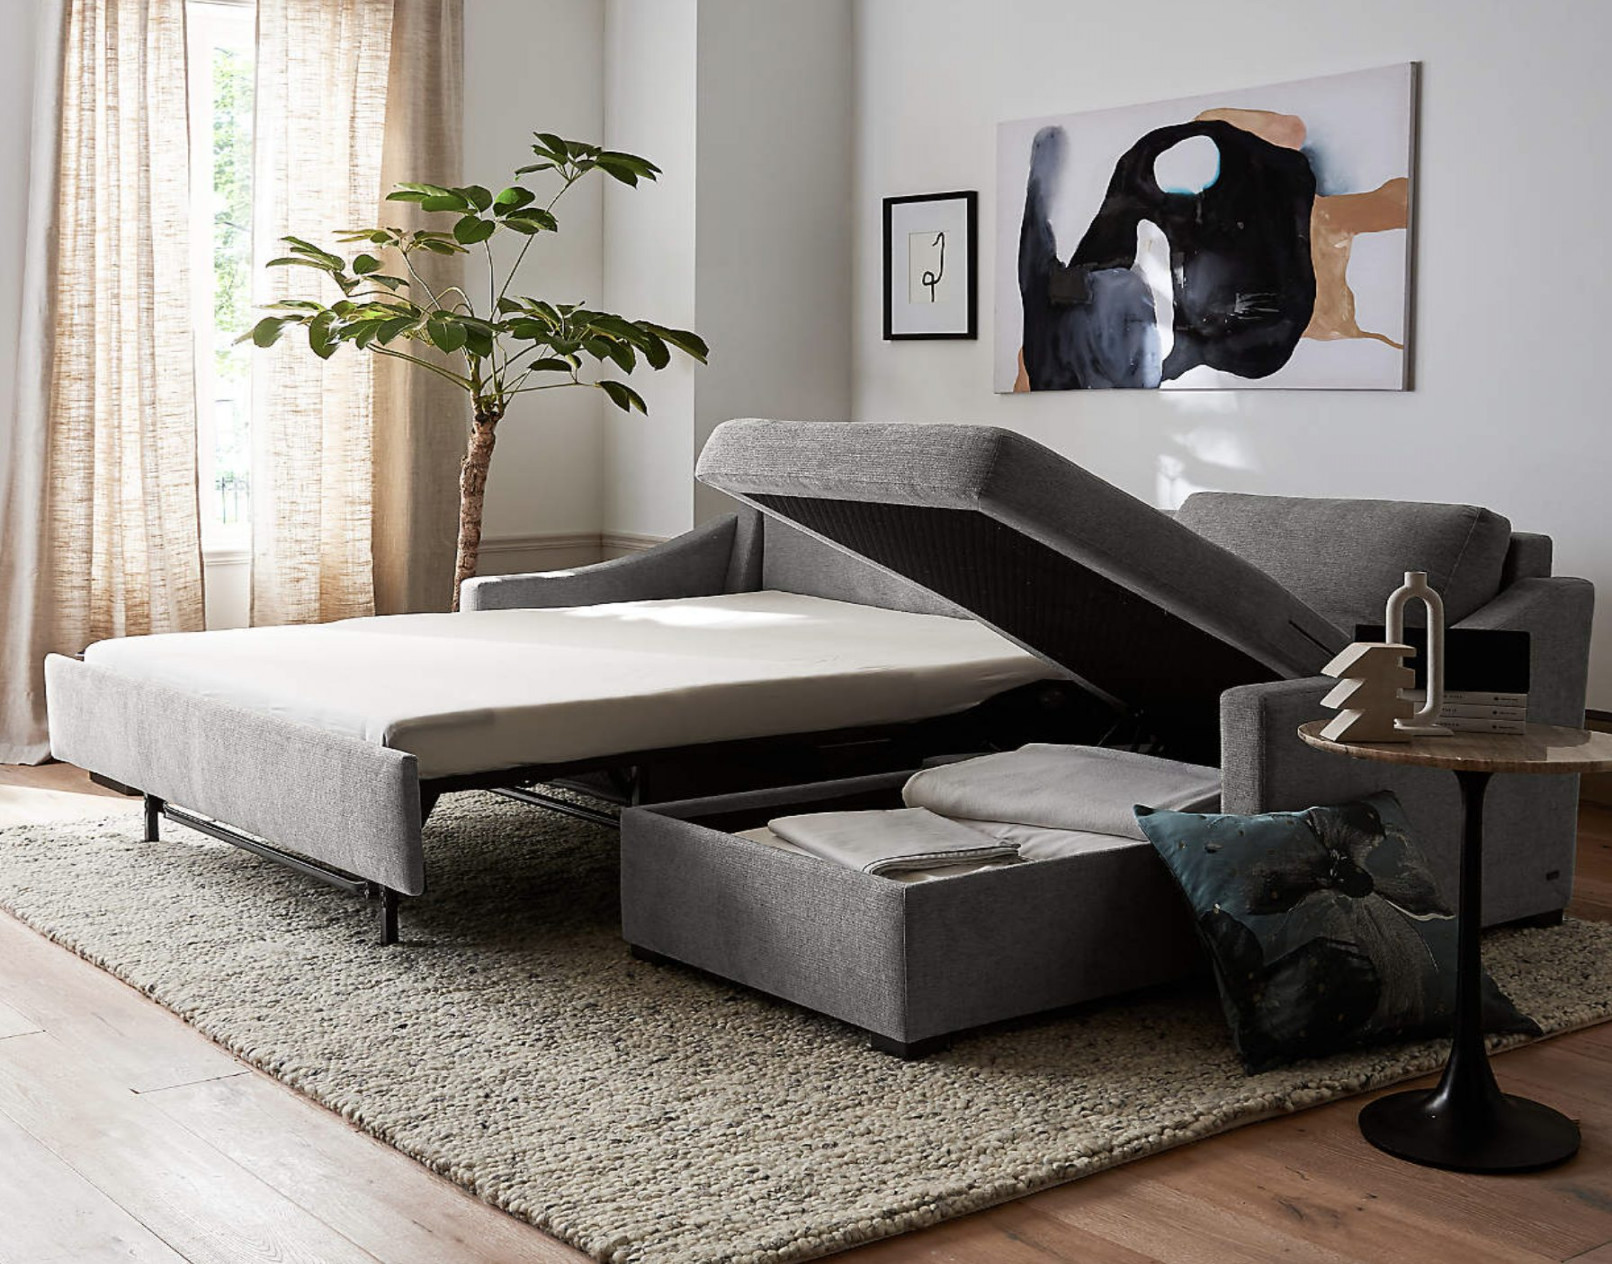 of the Best Sectional Couches With Pull Out Beds in